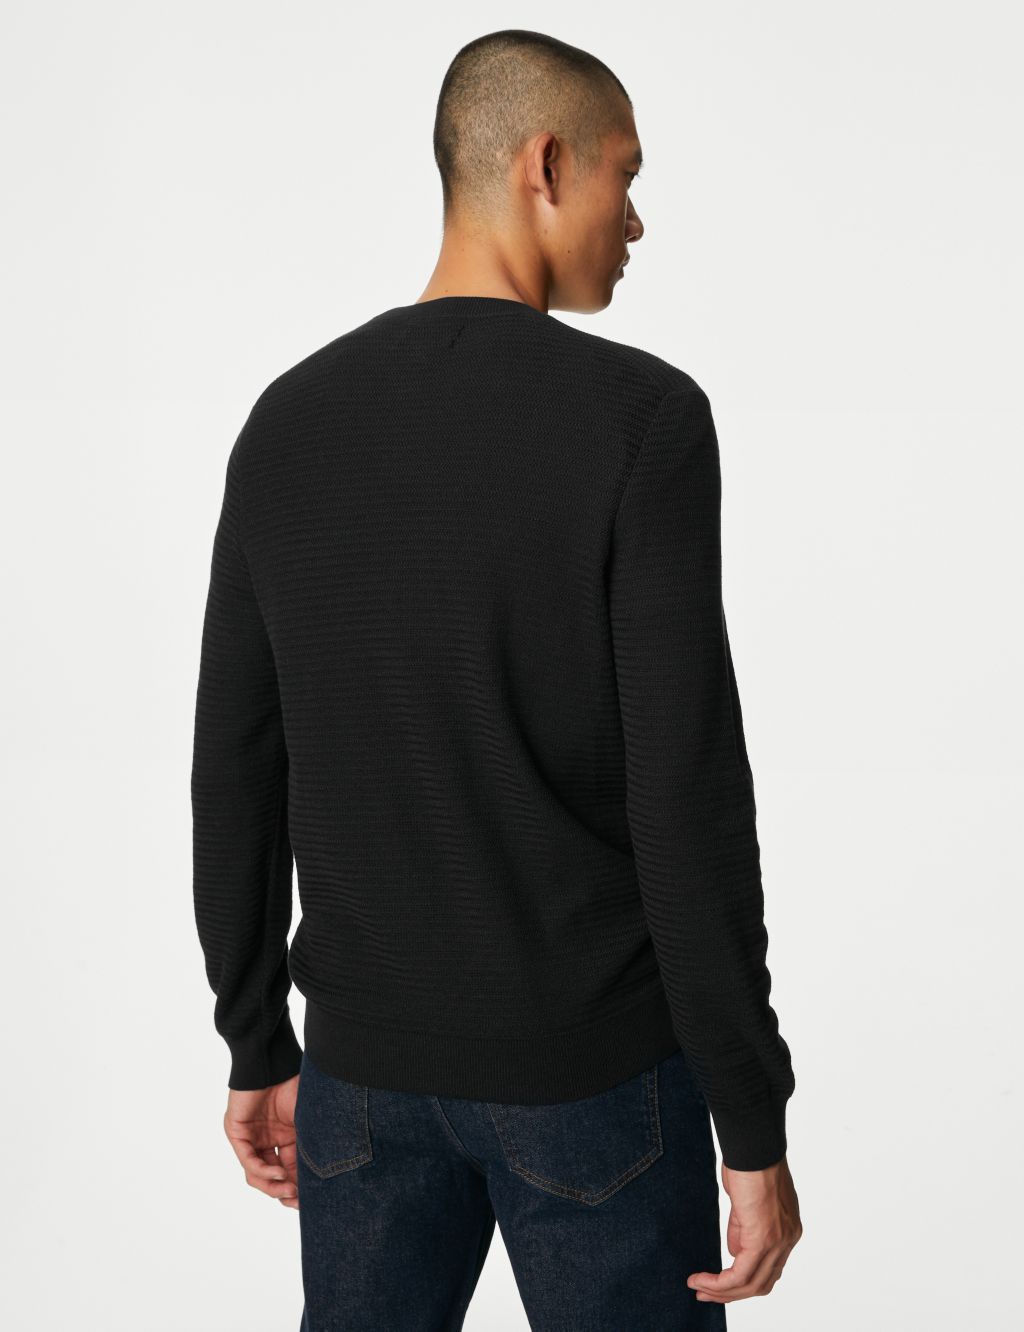 Cotton and Modal Blend Textured Crew Neck Jumper image 5